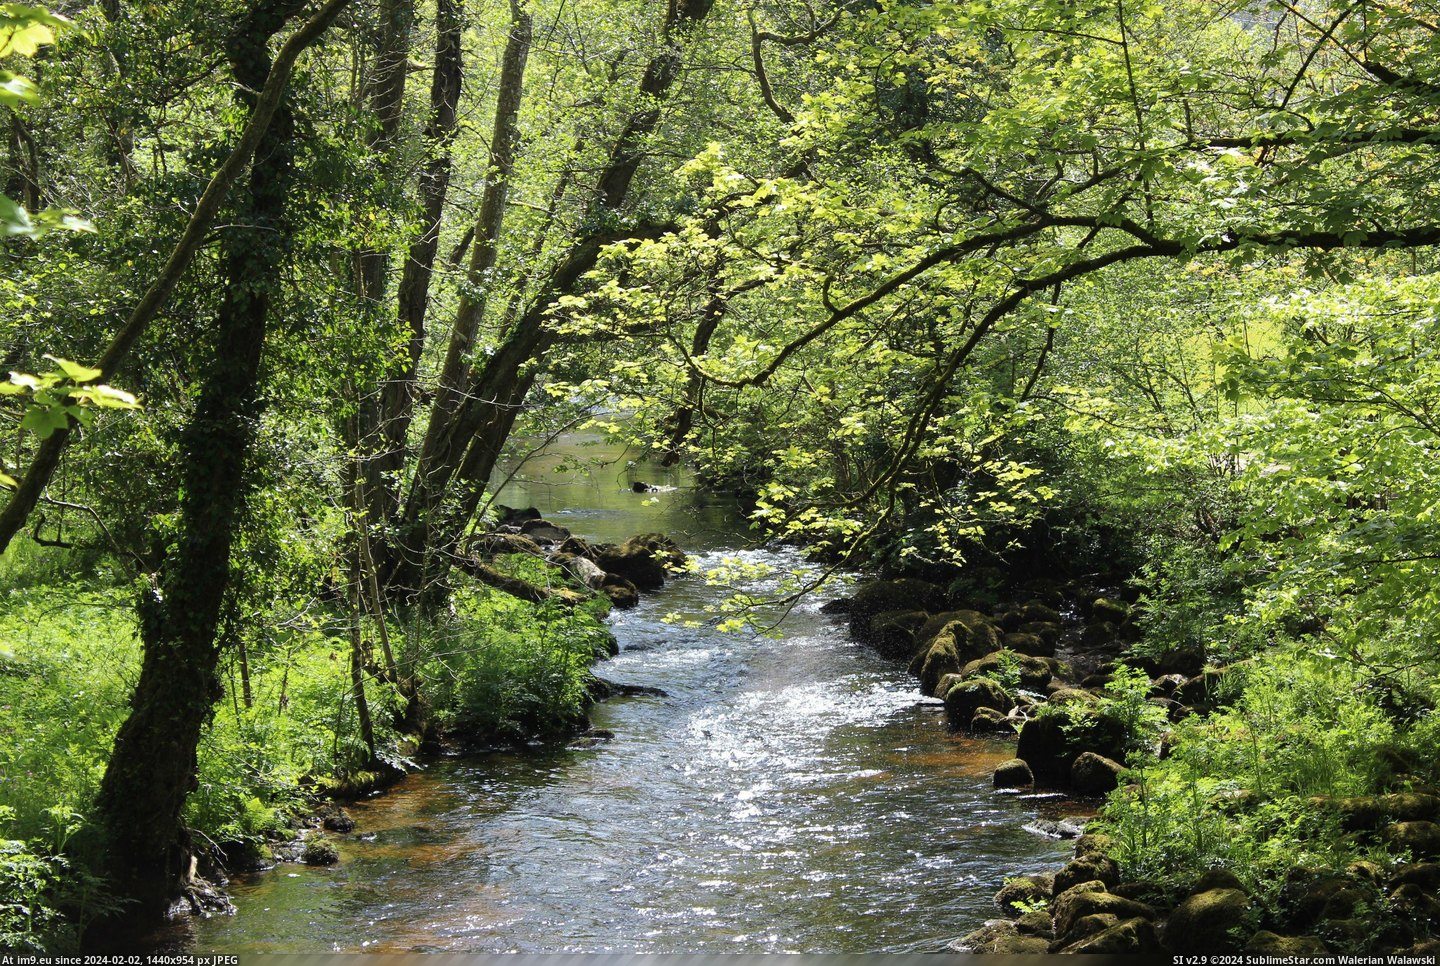 #River #England #5184x3456 #Forest [Earthporn] A secluded forest river - Dartmoor, England [5184x3456] Pic. (Image of album My r/EARTHPORN favs))